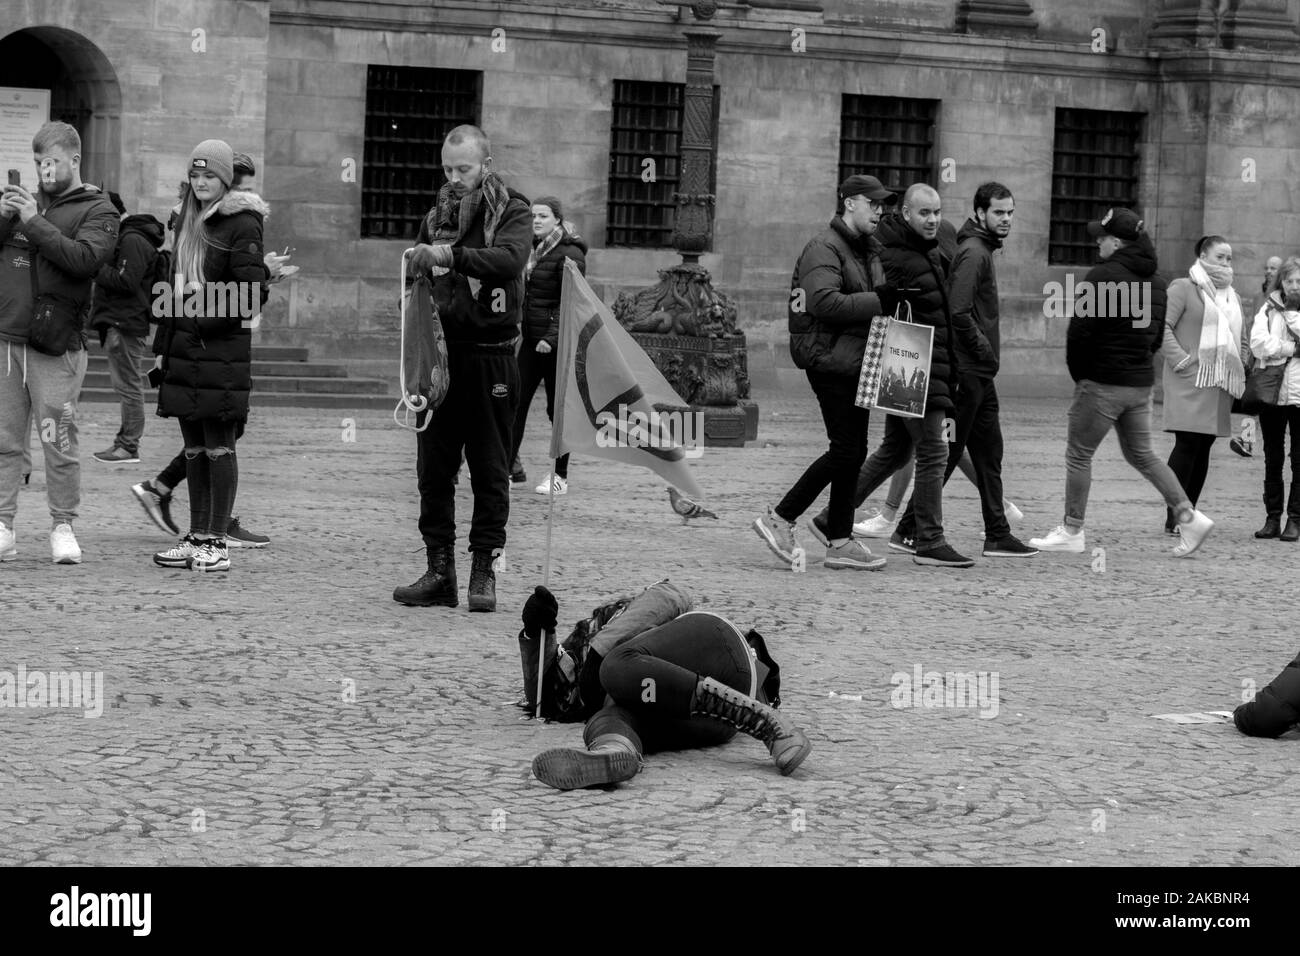 Died Protesters At The The Rebellion Extinction Group At The Demonstration On The Dam At 6-1-2020 Amsterdam The Netherlands 2020 In Black And White Stock Photo